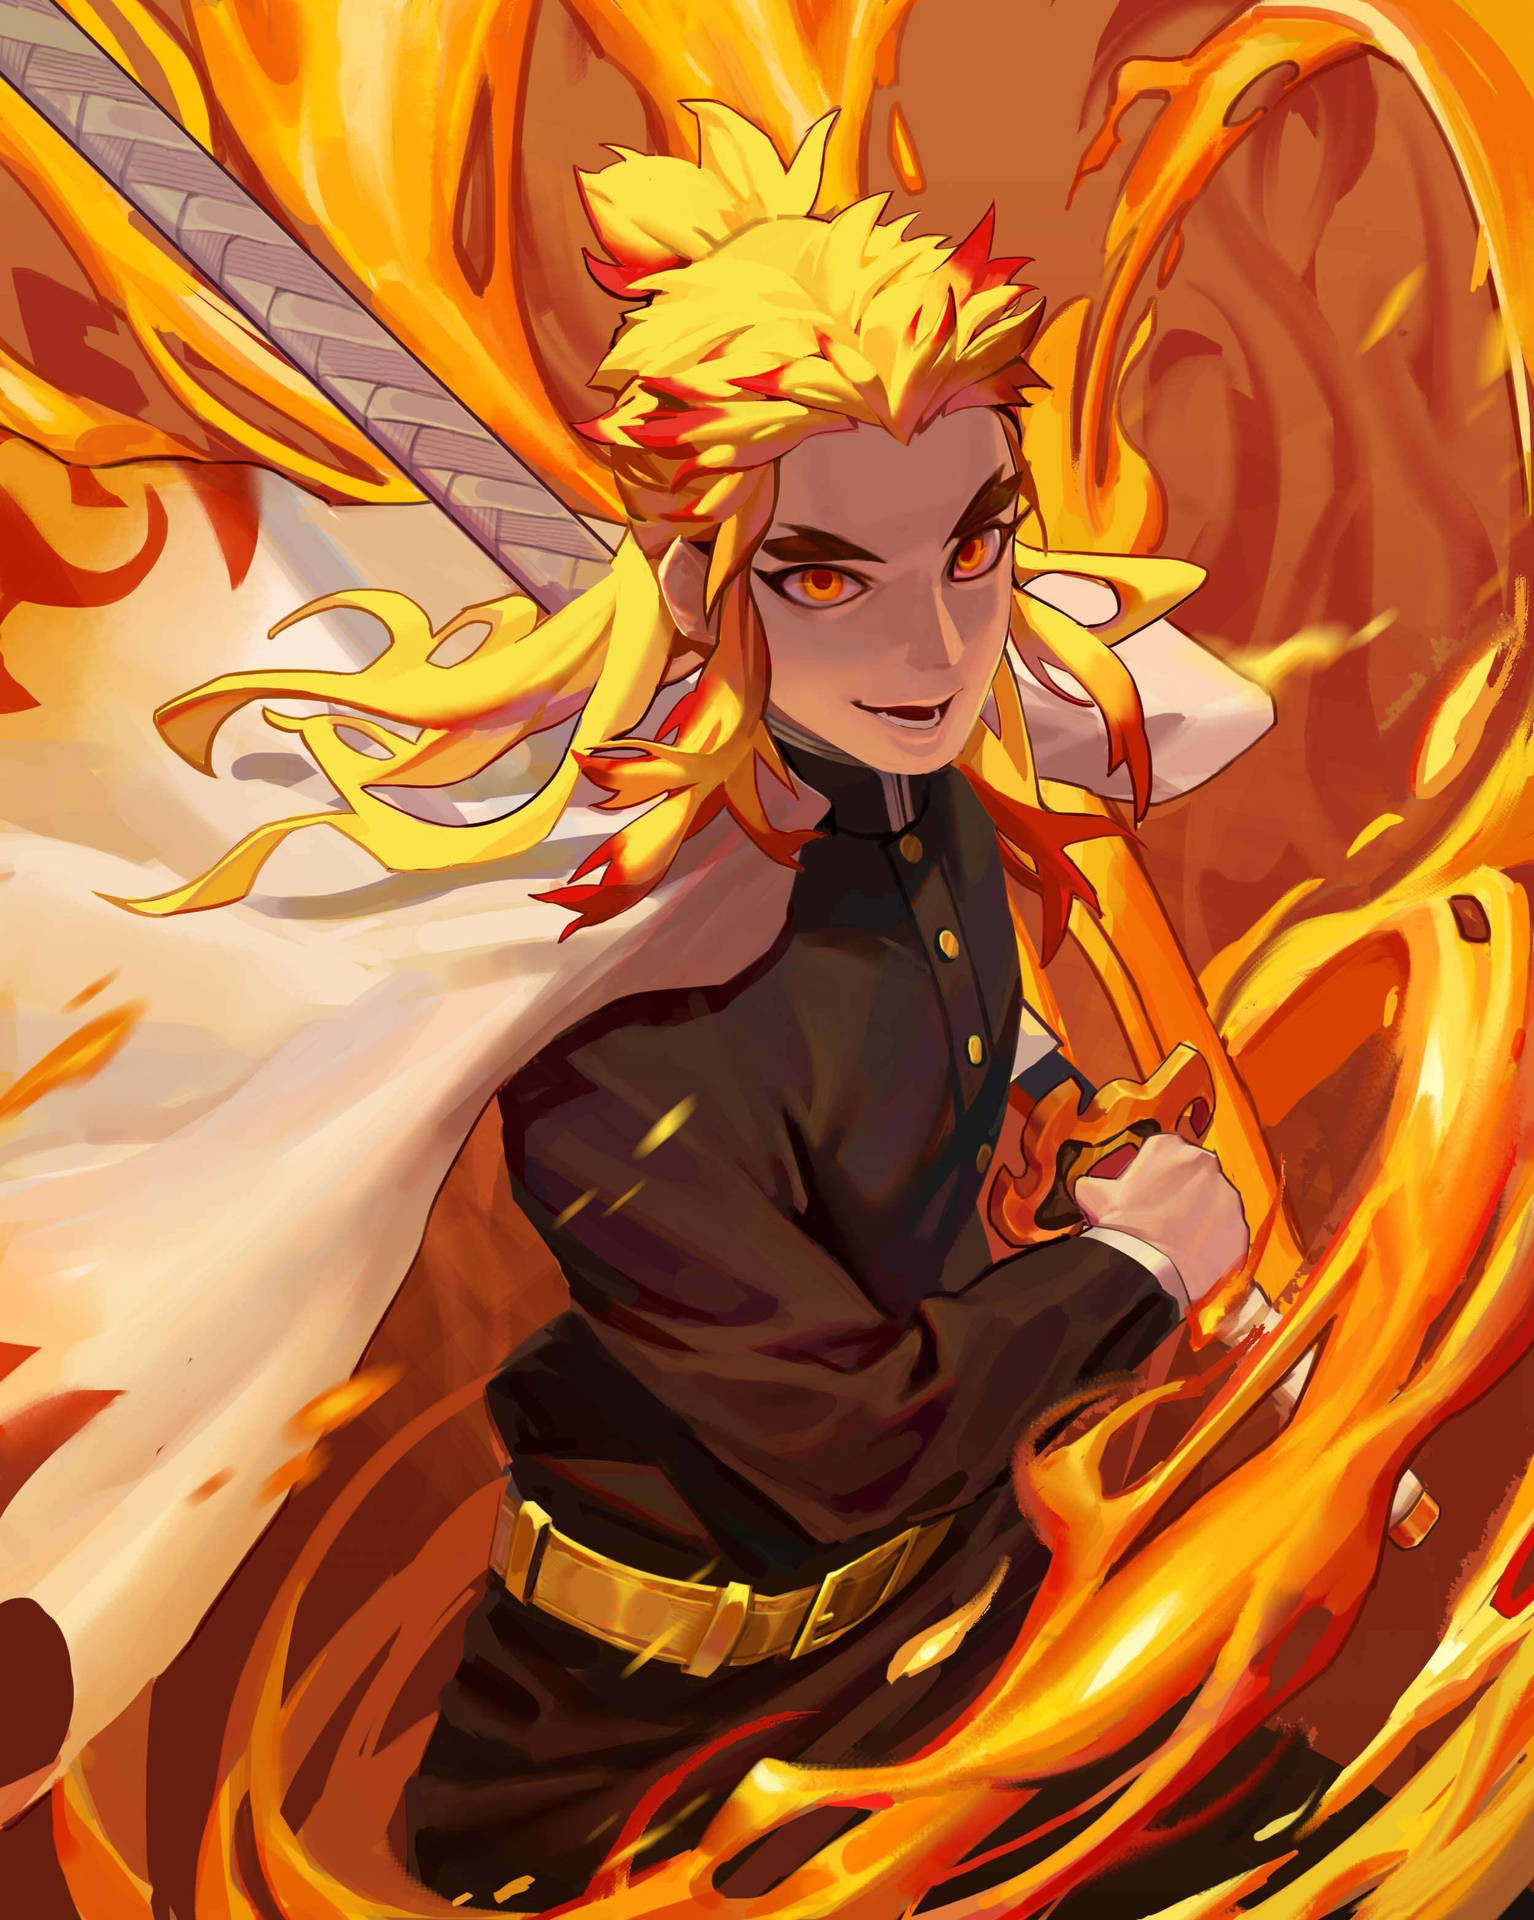 Conquer The Flames In Rengoku: The Flame Pillar Background